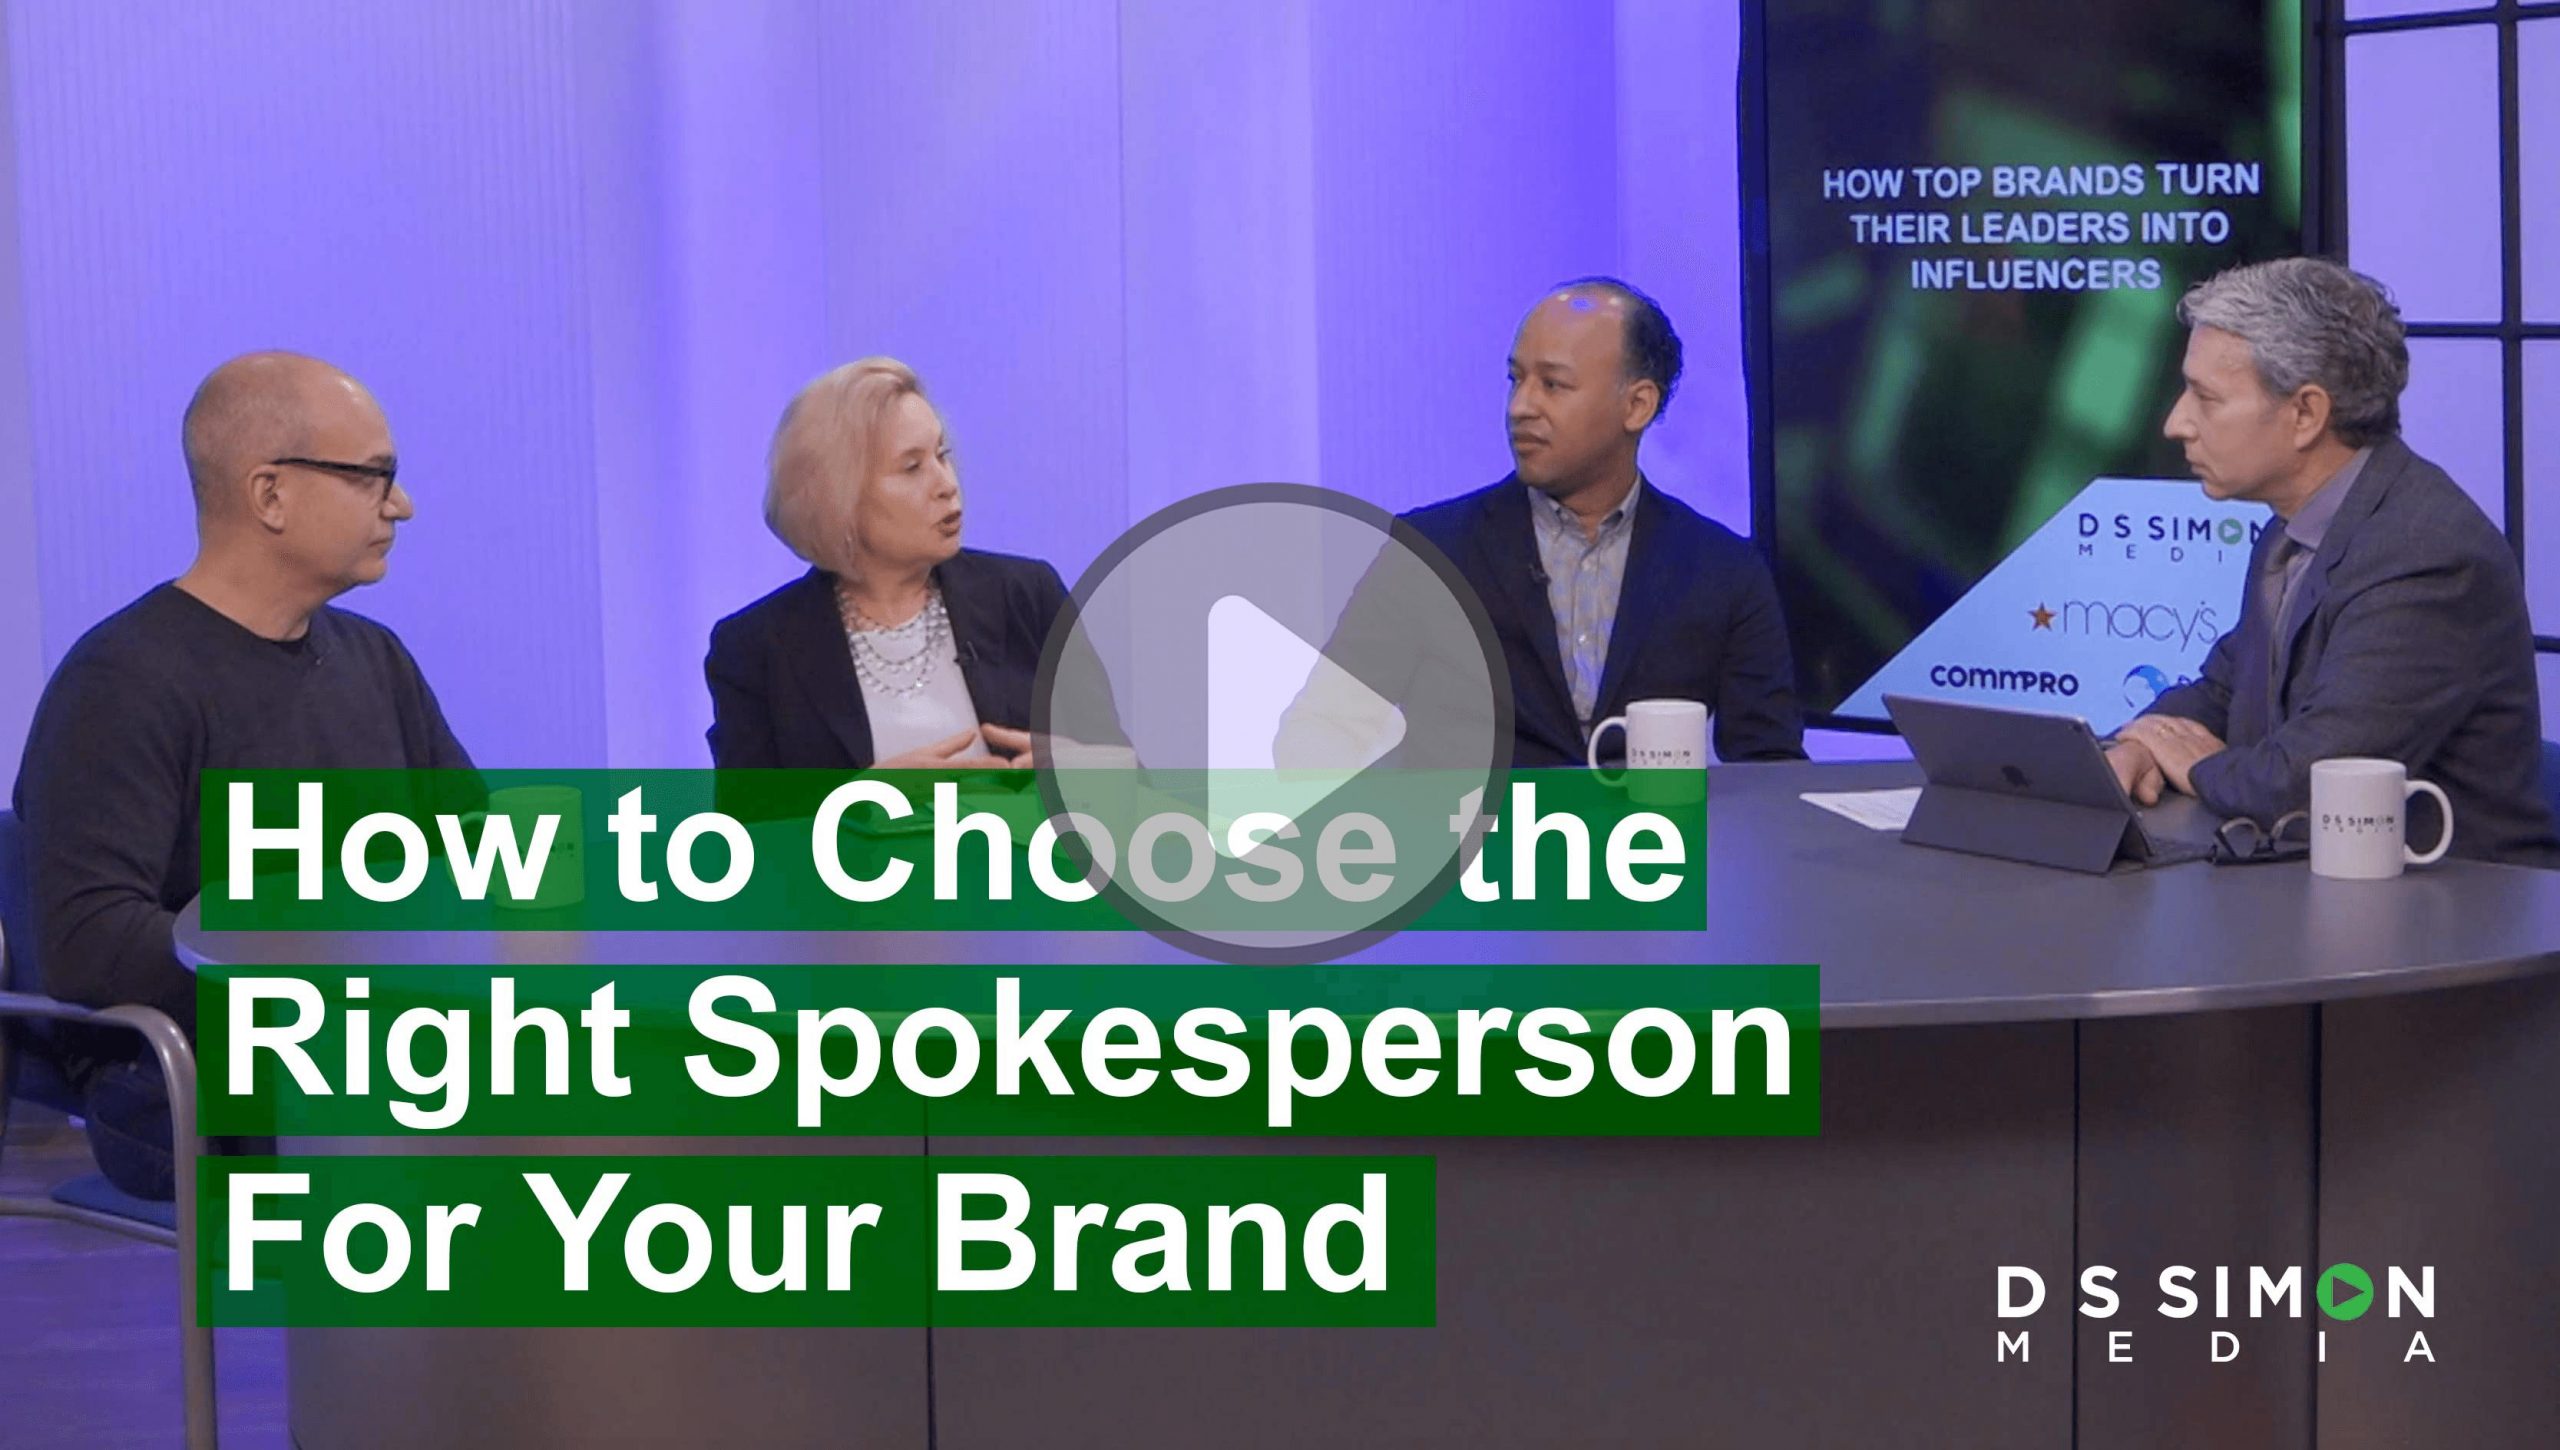 learn how to choose the right spokesperson for your brand